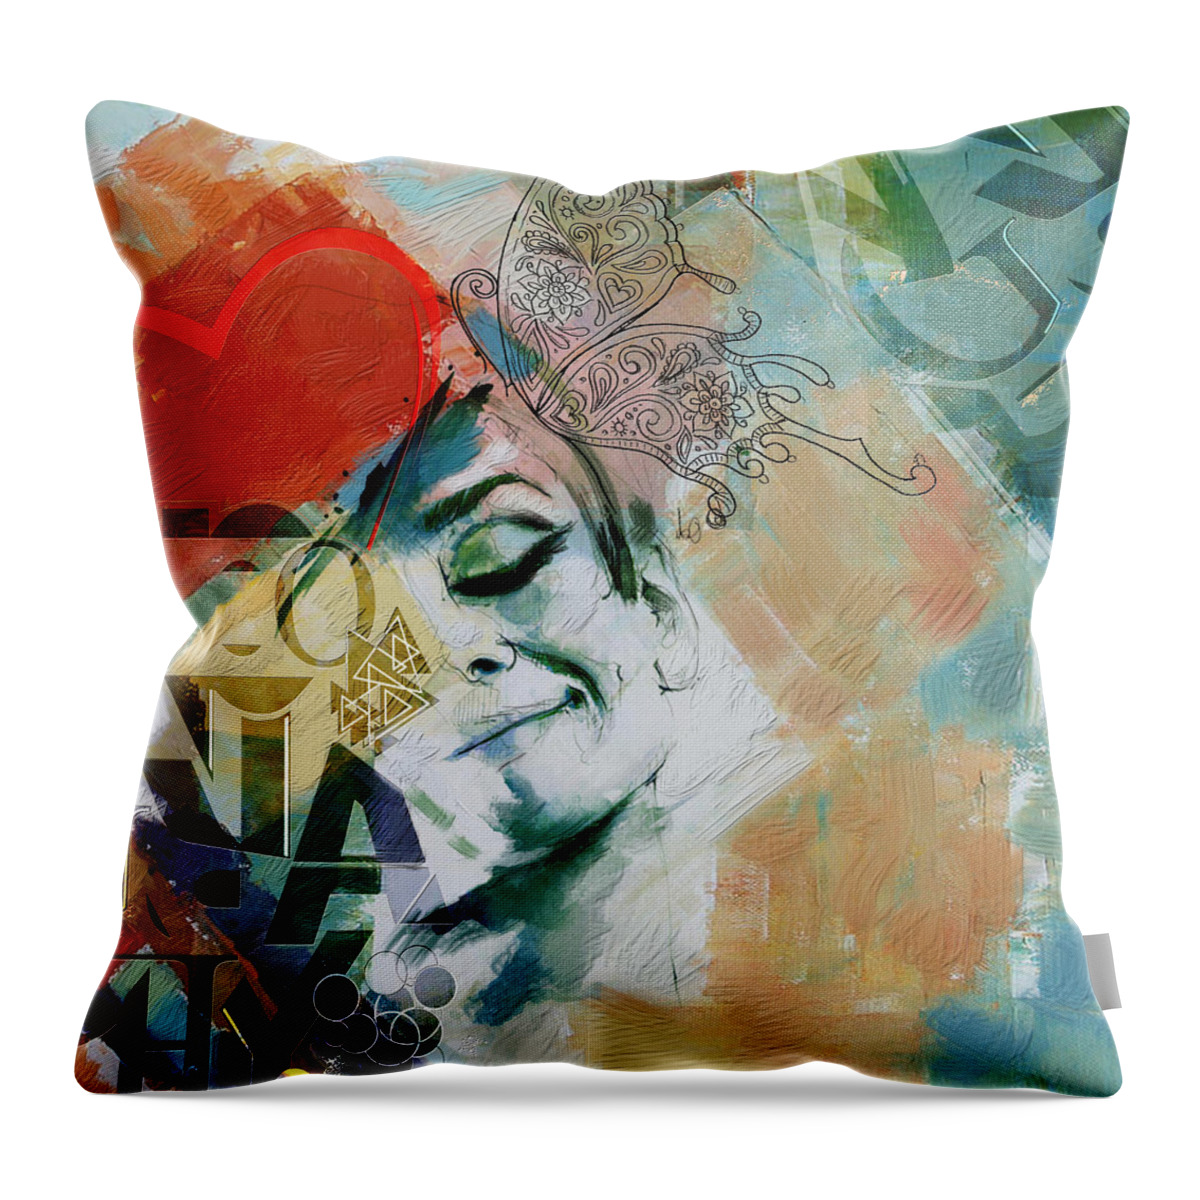 Women Throw Pillow featuring the painting Abstract Women 008 by Corporate Art Task Force